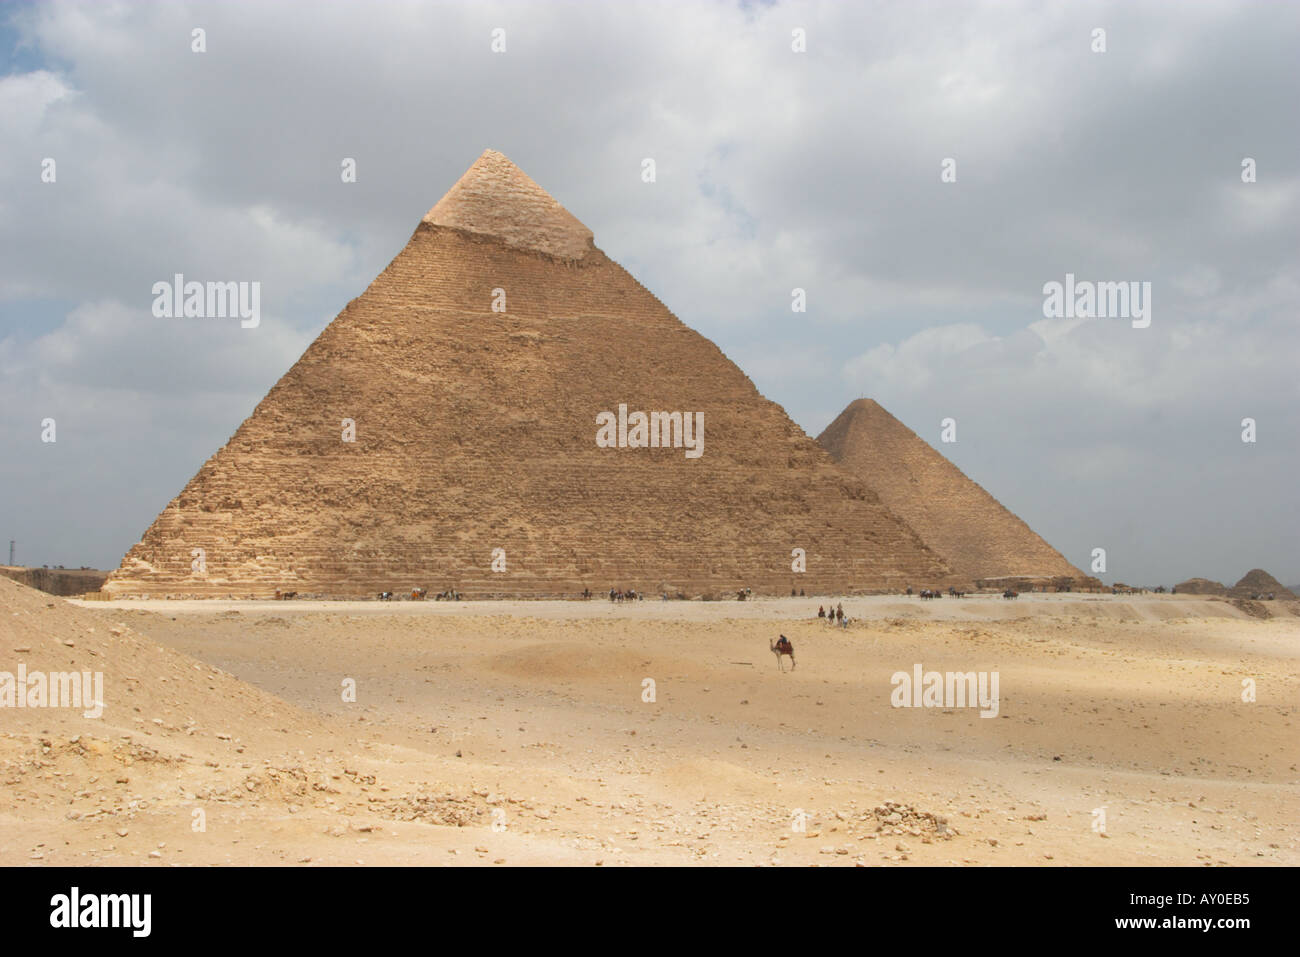 The Pyramid of Khafre Chephren Giza Plateua Egypt In the background the Great Pyramid of Khufu Cheops can be seen Stock Photo